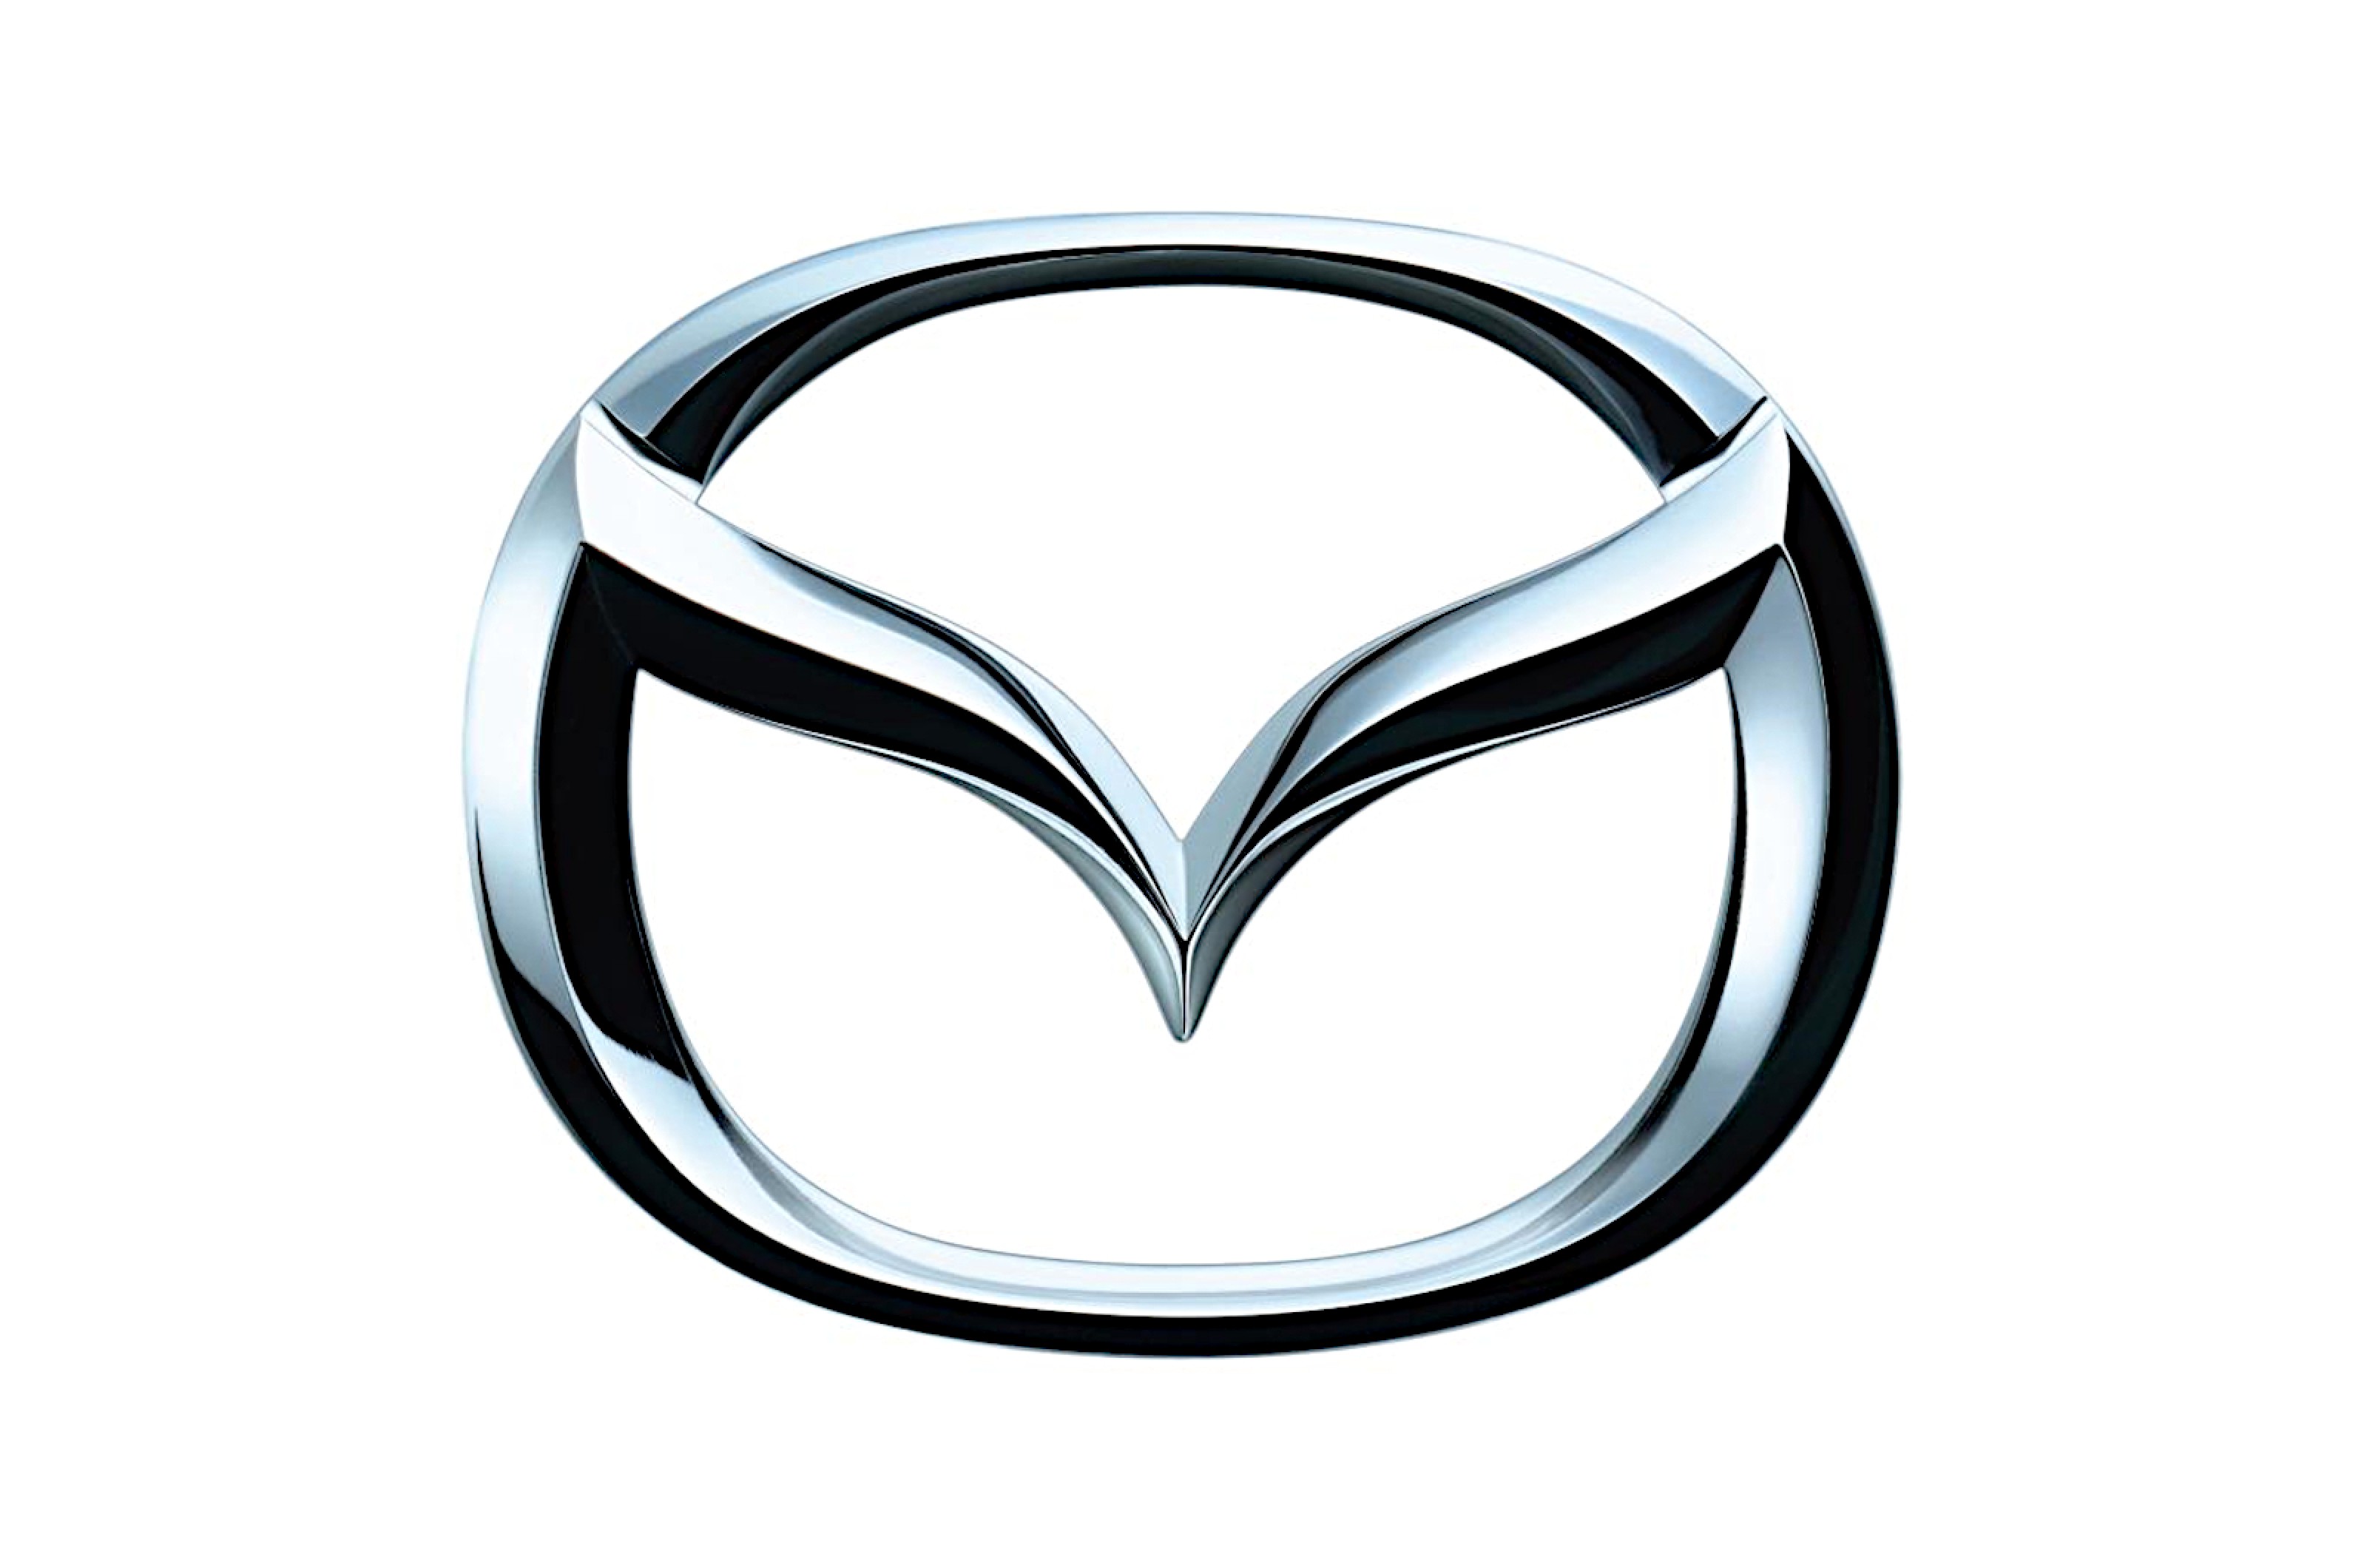 <p>Mazda’s original logo first appeared in 1934, and was replaced several times before the end of the century.</p>  <p>The current version is relatively recent, having been adopted in June 1997.</p>  <p>It suggests the letter M, but in fact consists of a V-shaped wing design mounted in what Mazda describes as an oval, though ‘squircle’ might also work.</p>  <p>The logo was updated very slightly in October 2015, and now has less contrast between the lighter and darker elements than it used to.</p>